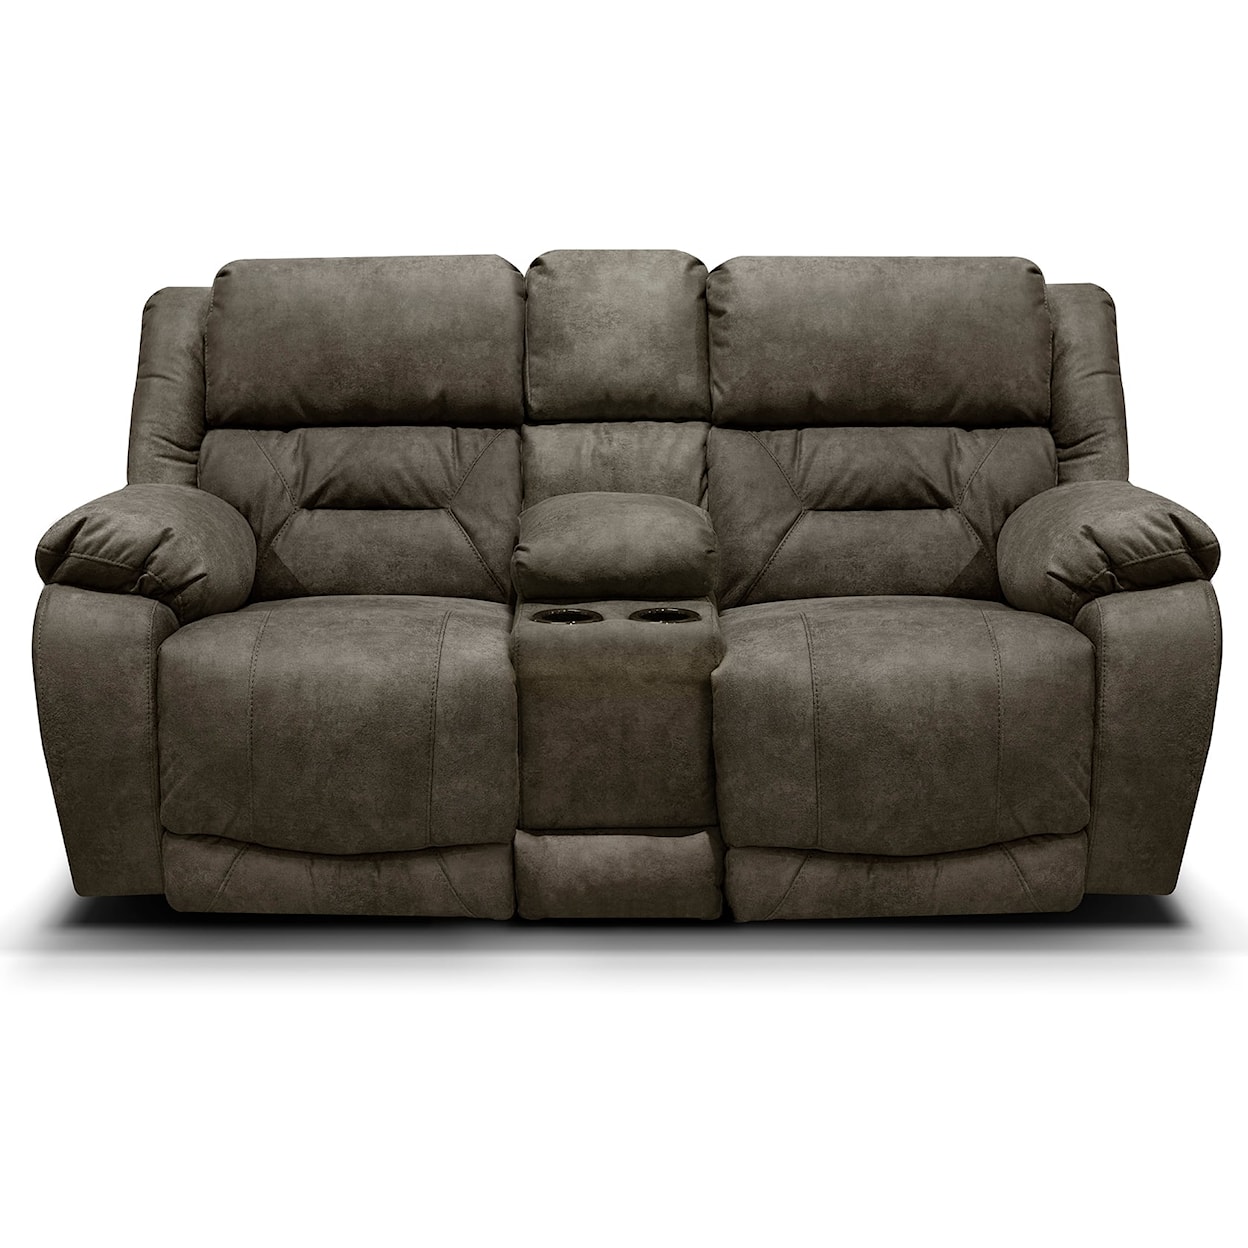 Dimensions EZ9B00/H Series Dual Reclining Loveseat with Console